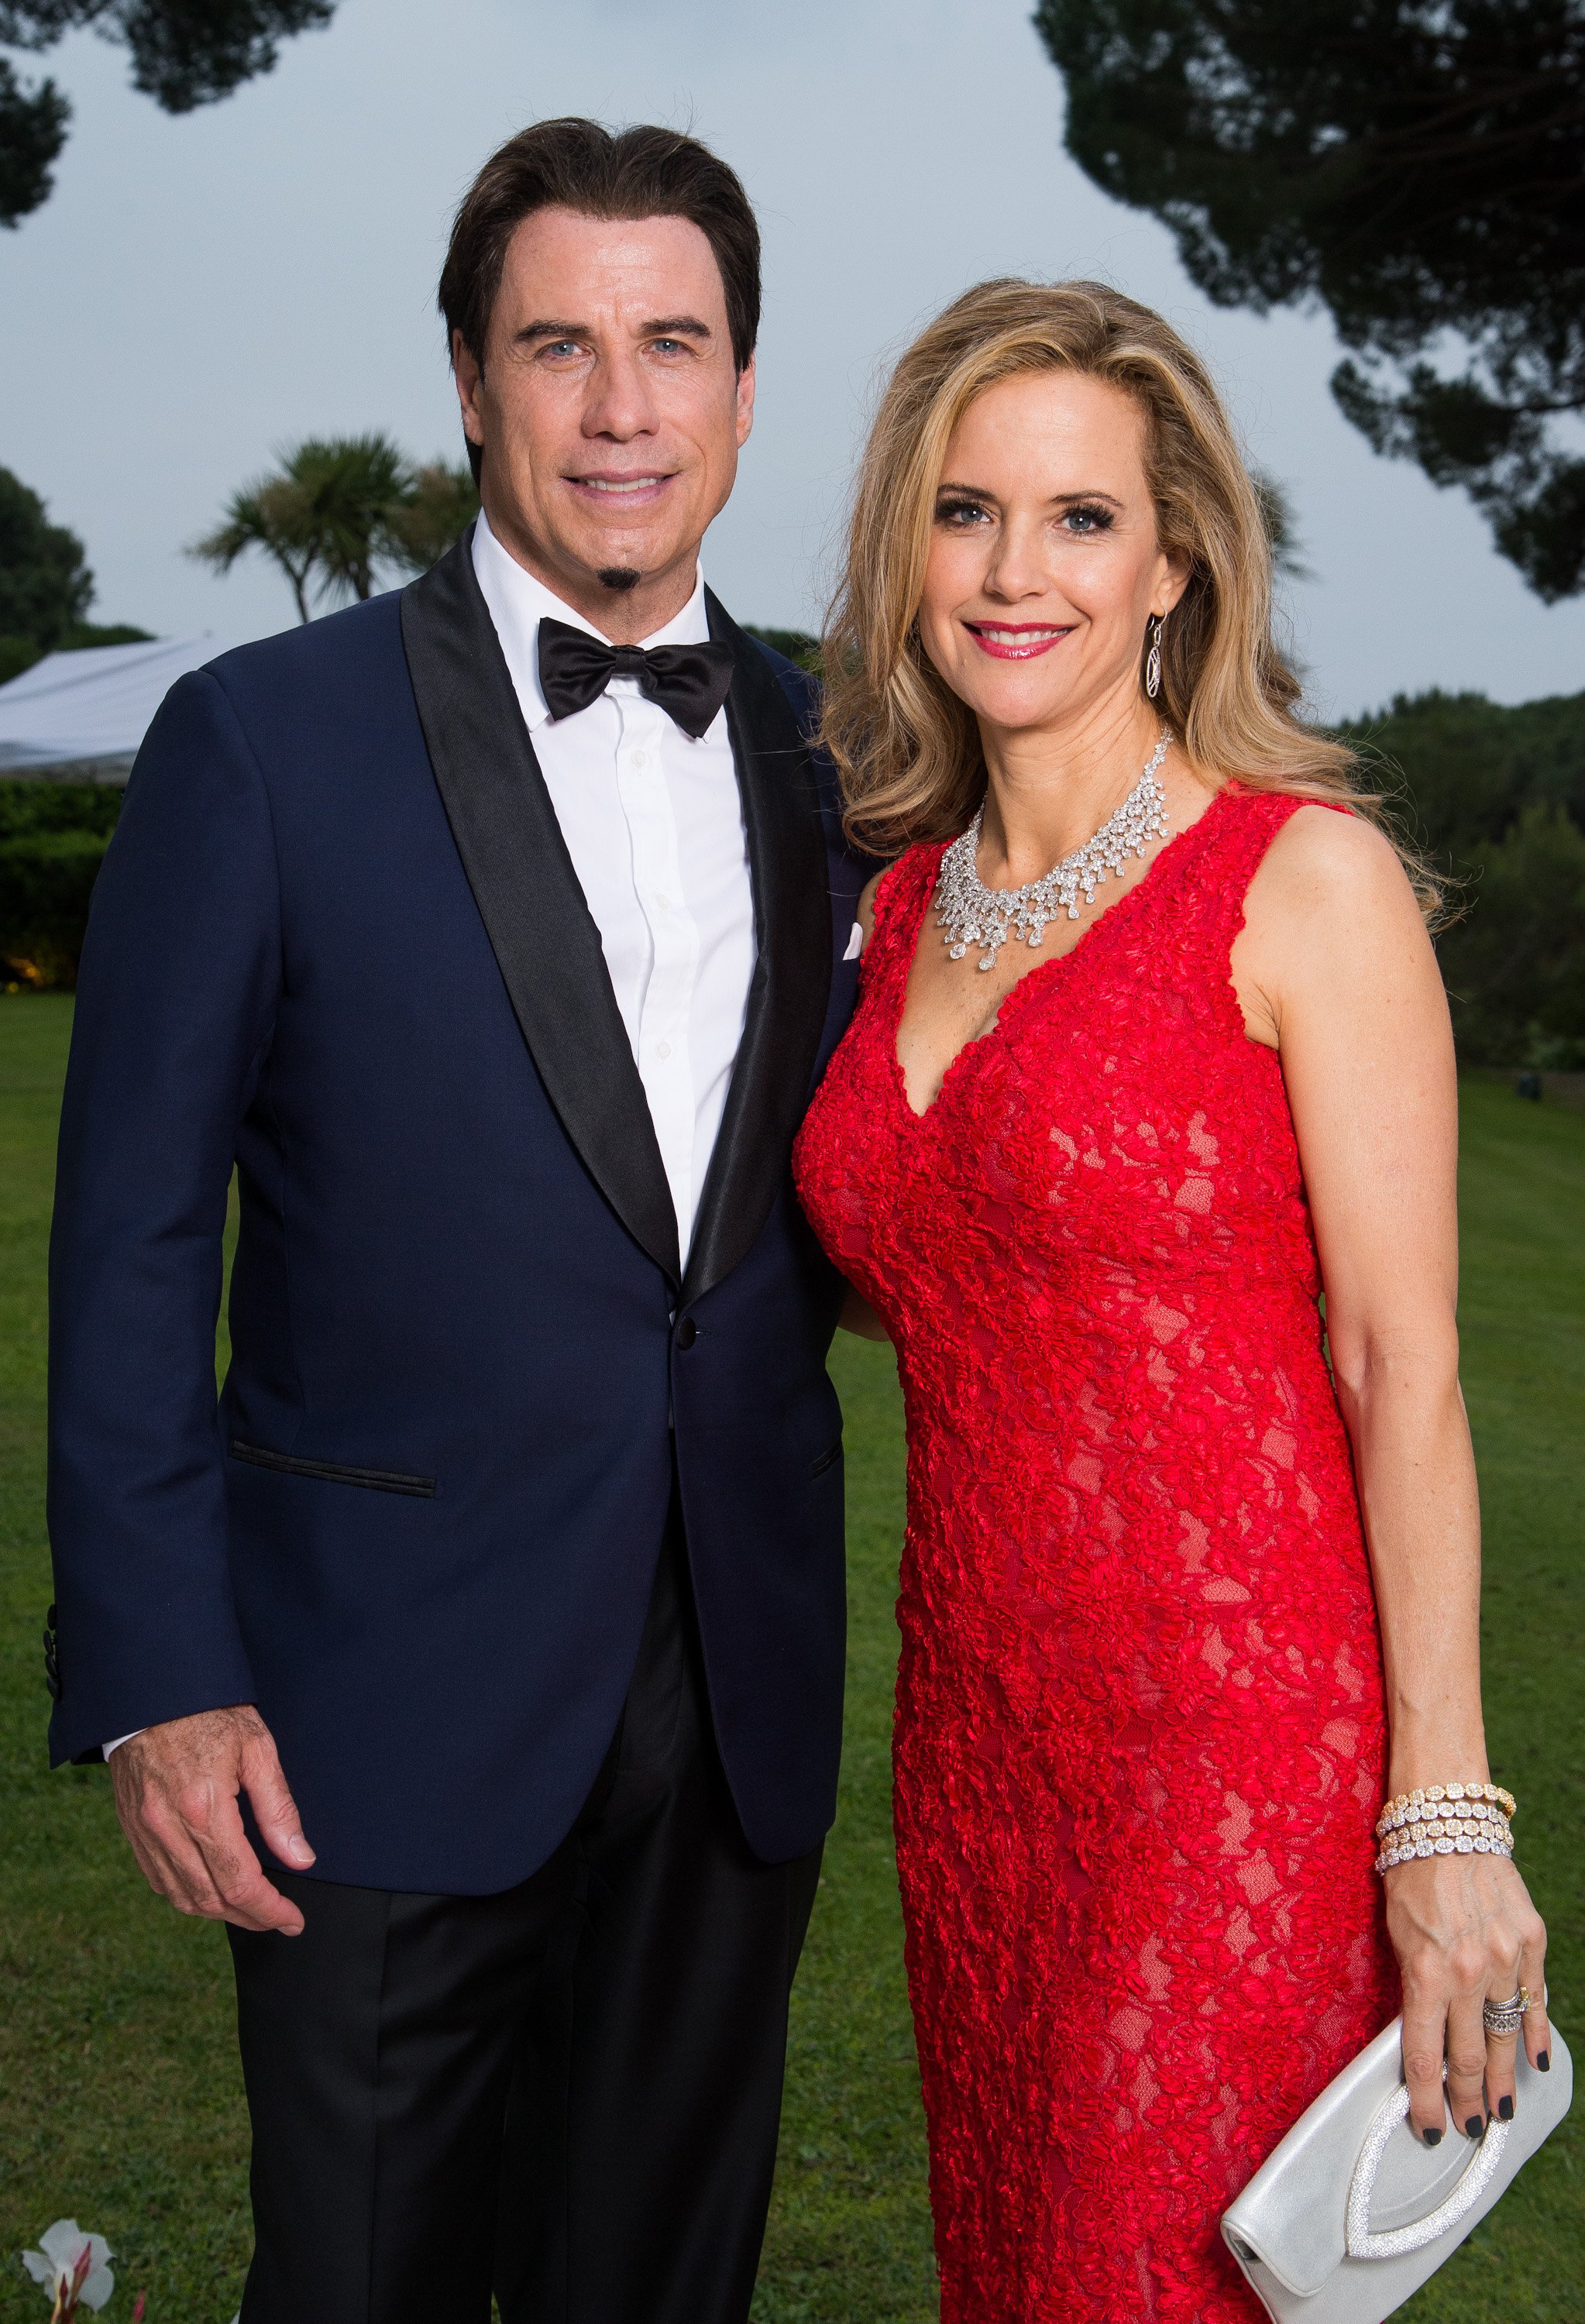 John Travolta and Kelly Preston during amfAR's 21st Cinema Against AIDS Gala at Hotel du Cap-Eden-Roc on May 22, 2014 in Cap d'Antibes, France. | Source: Getty Images